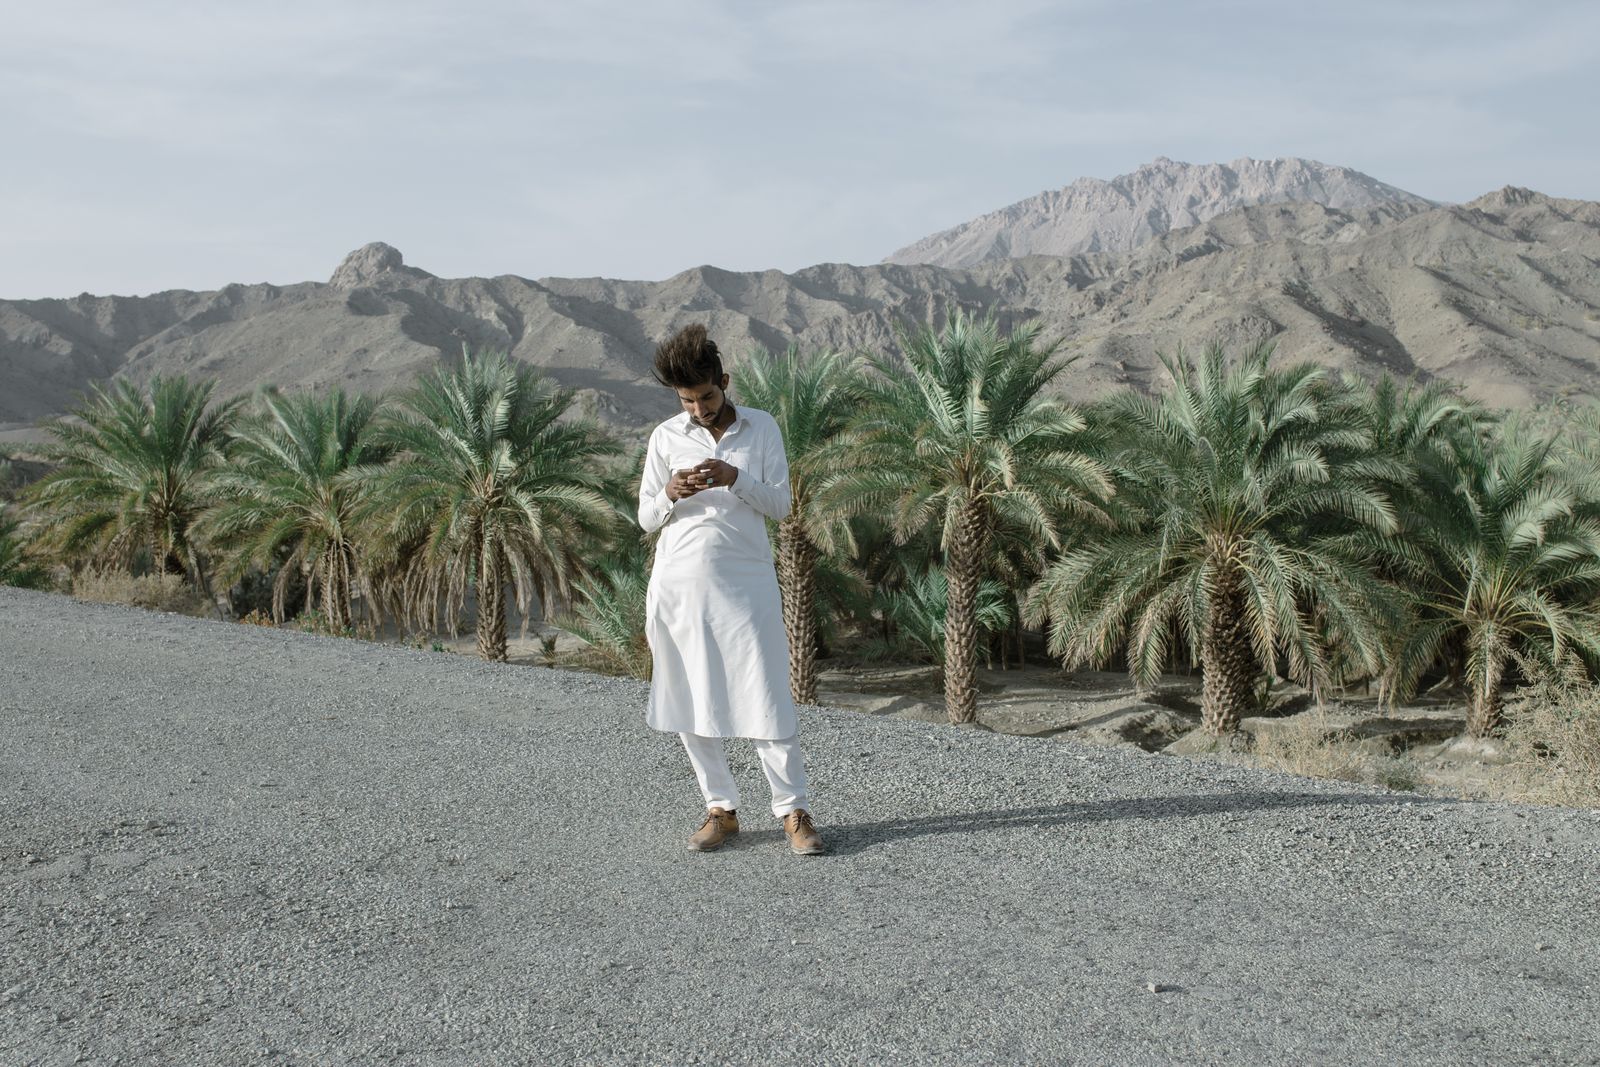 © Solmaz Daryani - Image from the In The Desert of Iran’s Wetlands photography project